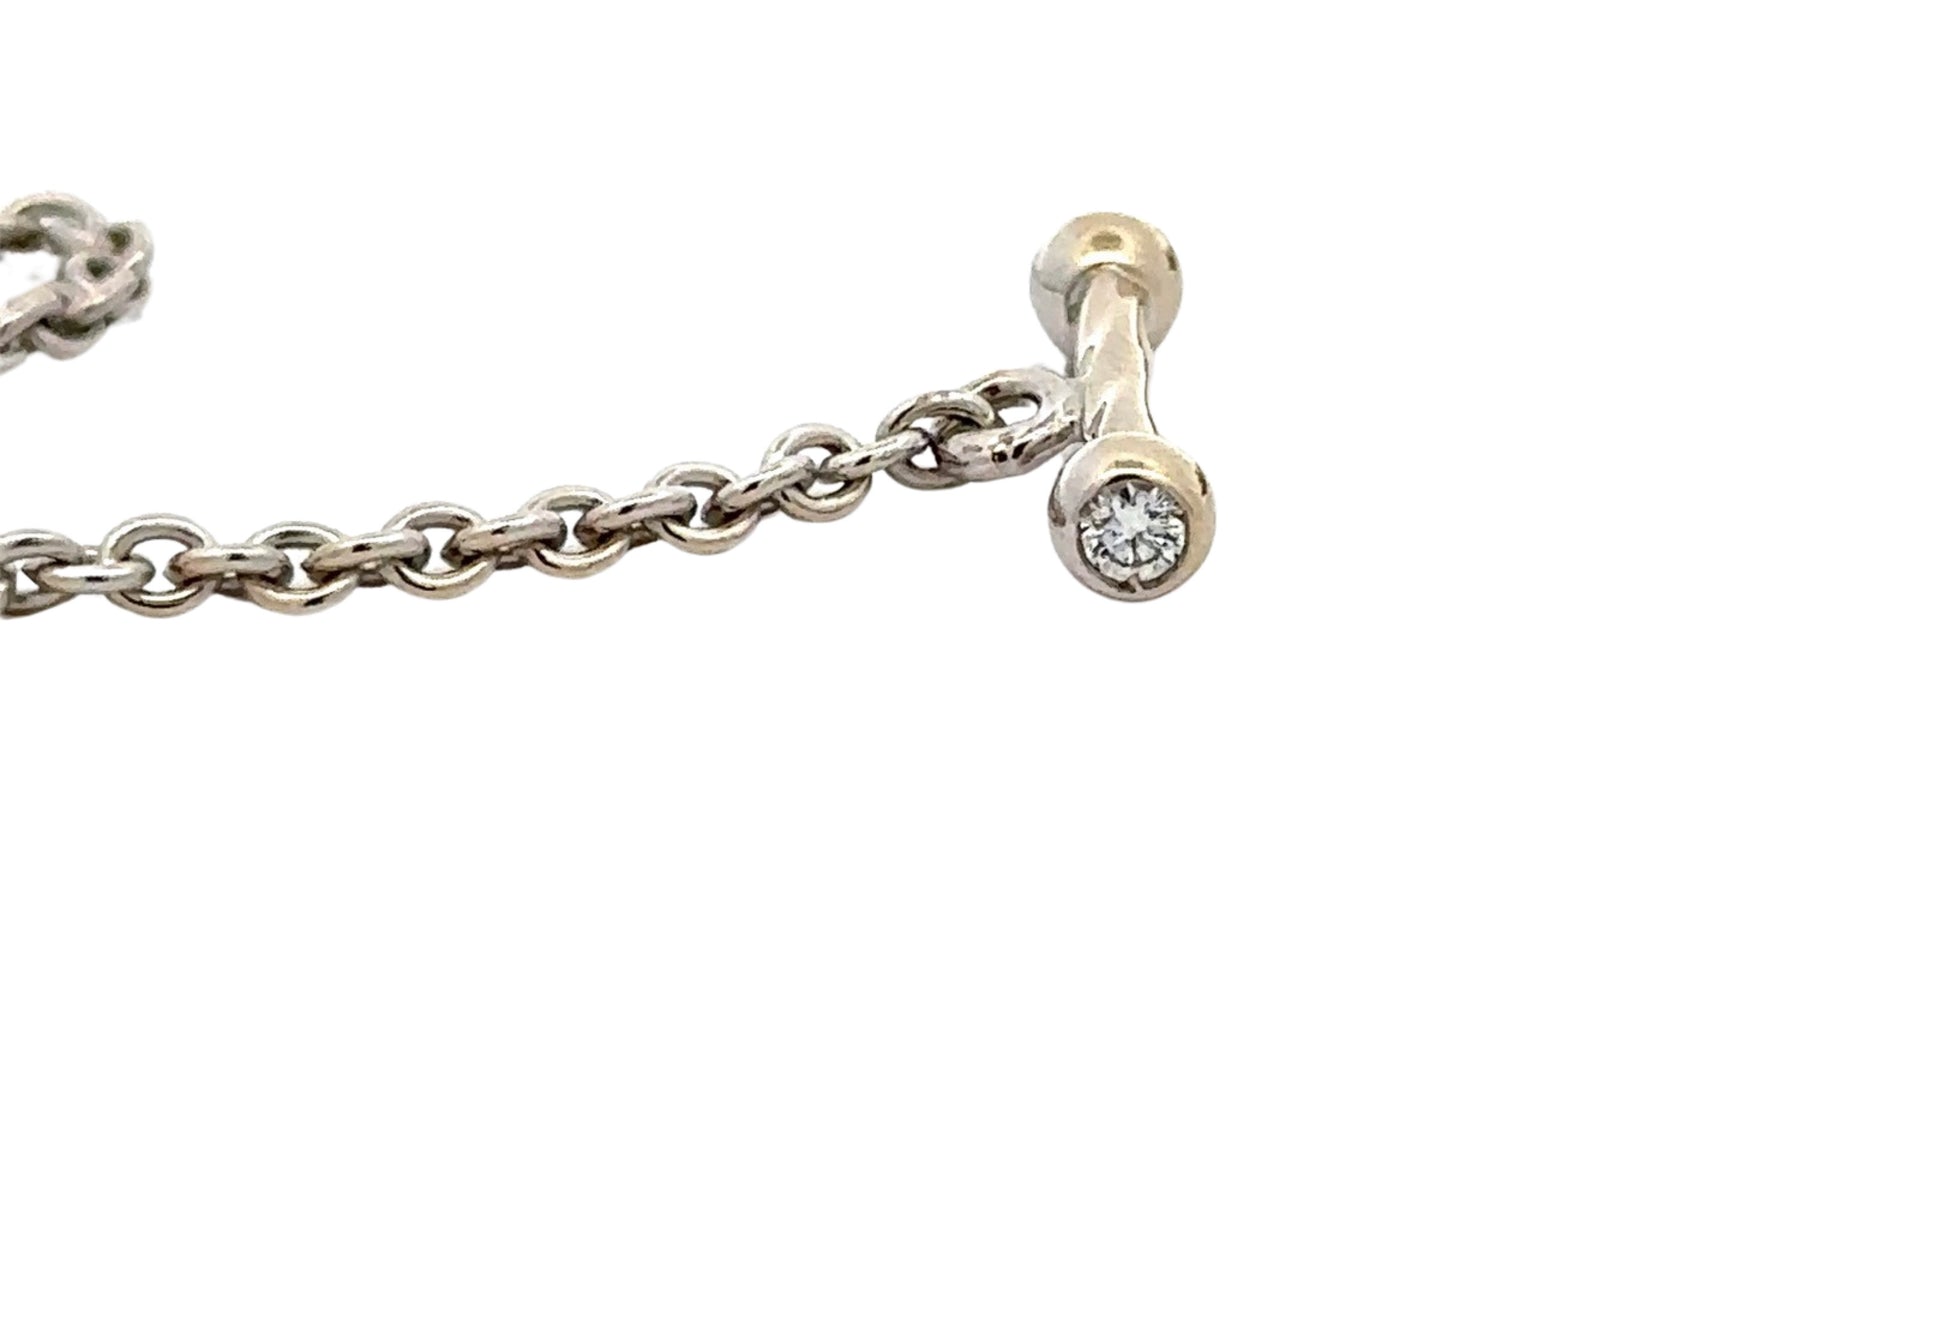 Toggle clasp with 1 small round brilliant diamond on the end